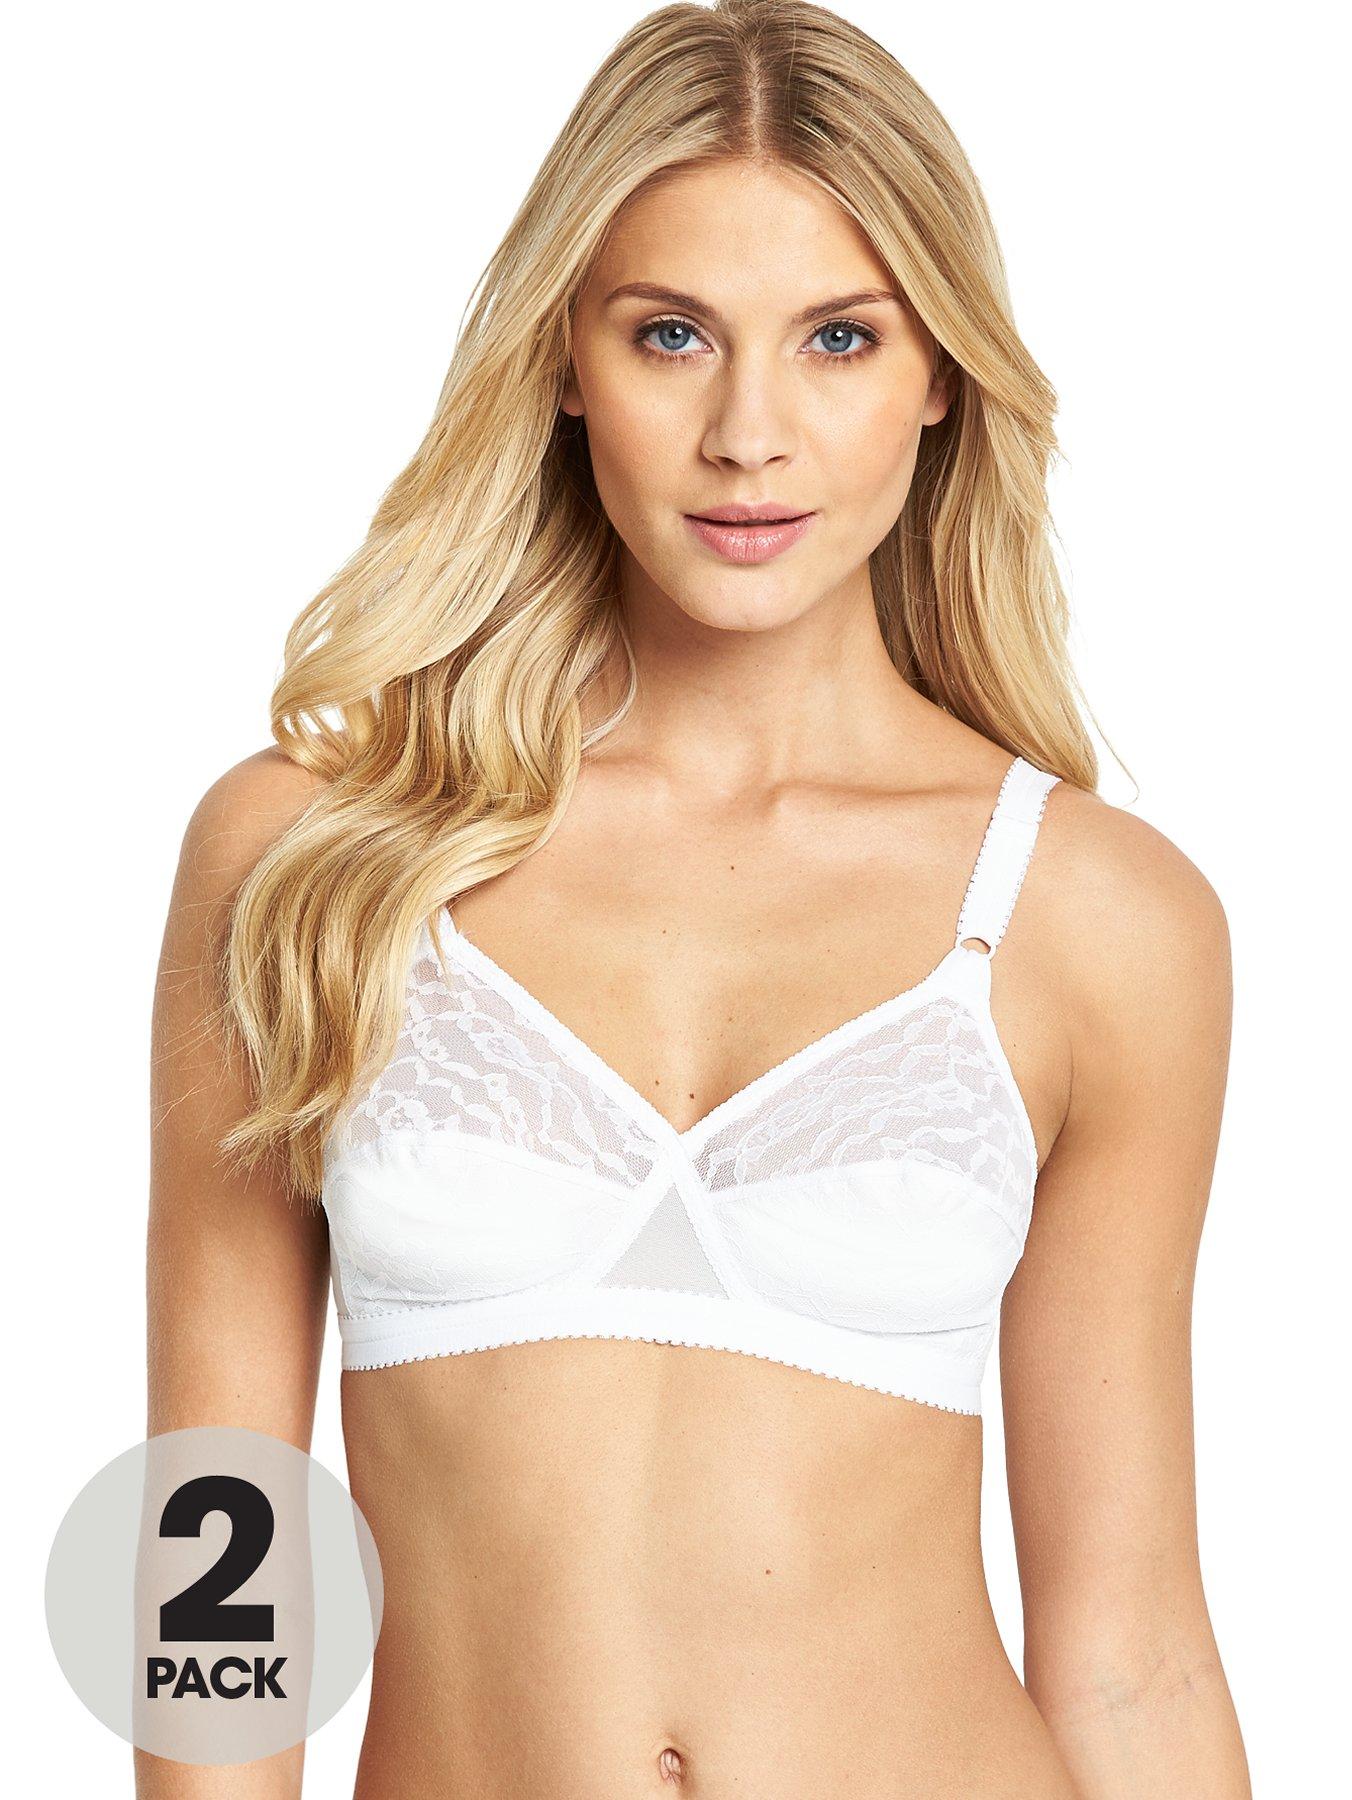 Deals on Playtex Cross Your Heart 2 Pack Lace Soft Cup Bra Black